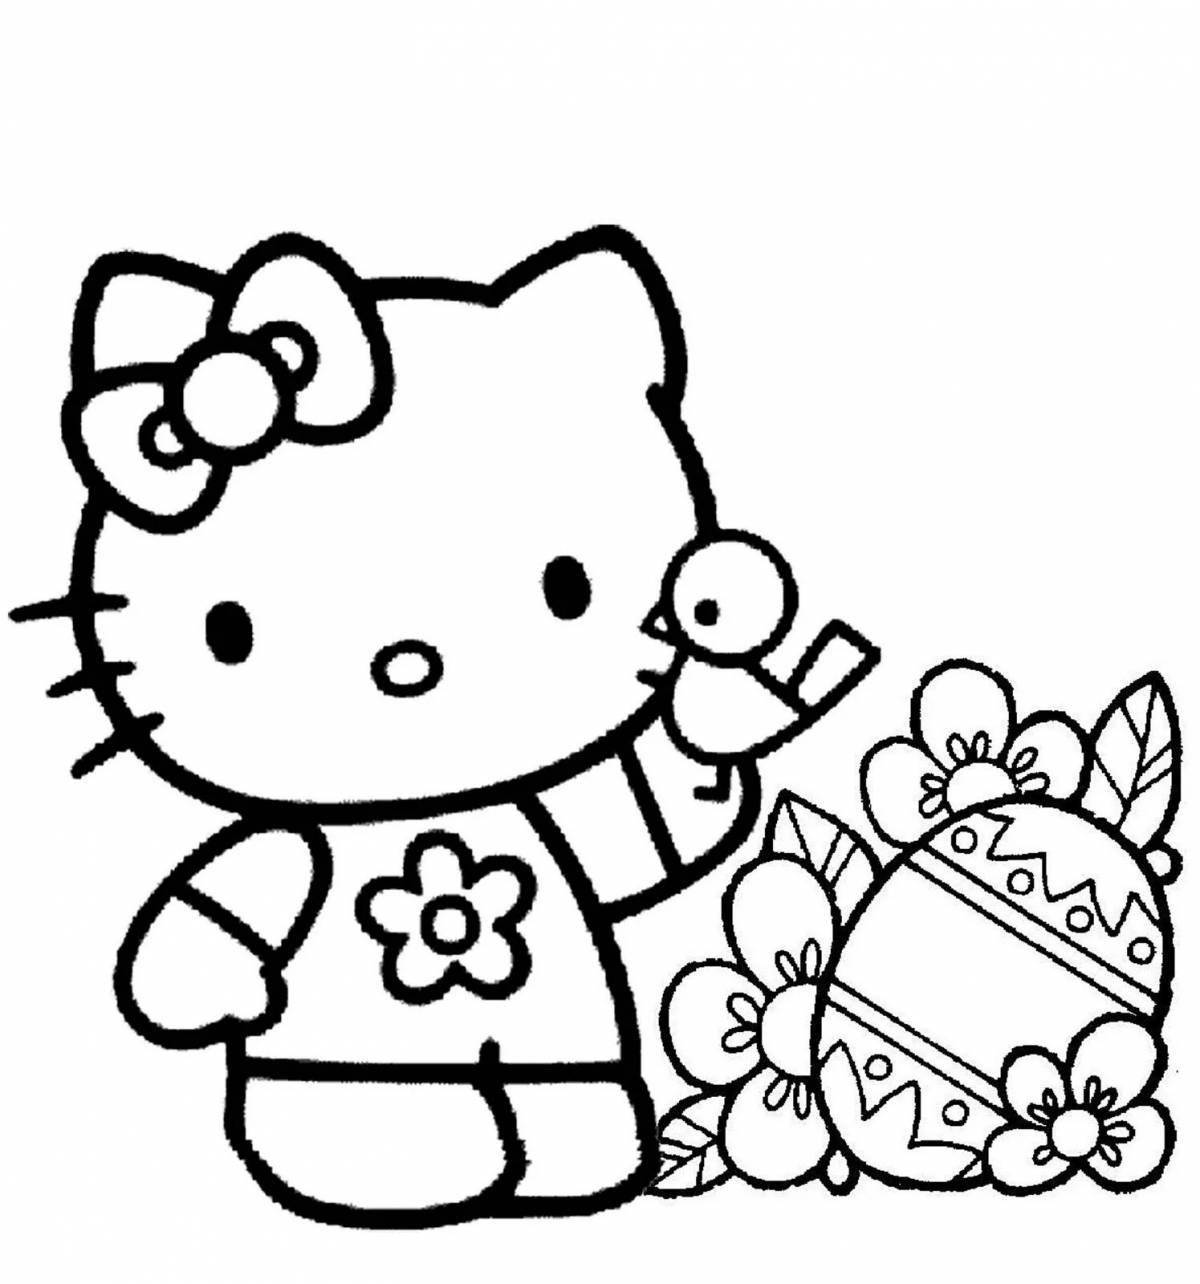 Kitty mity's amazing coloring book